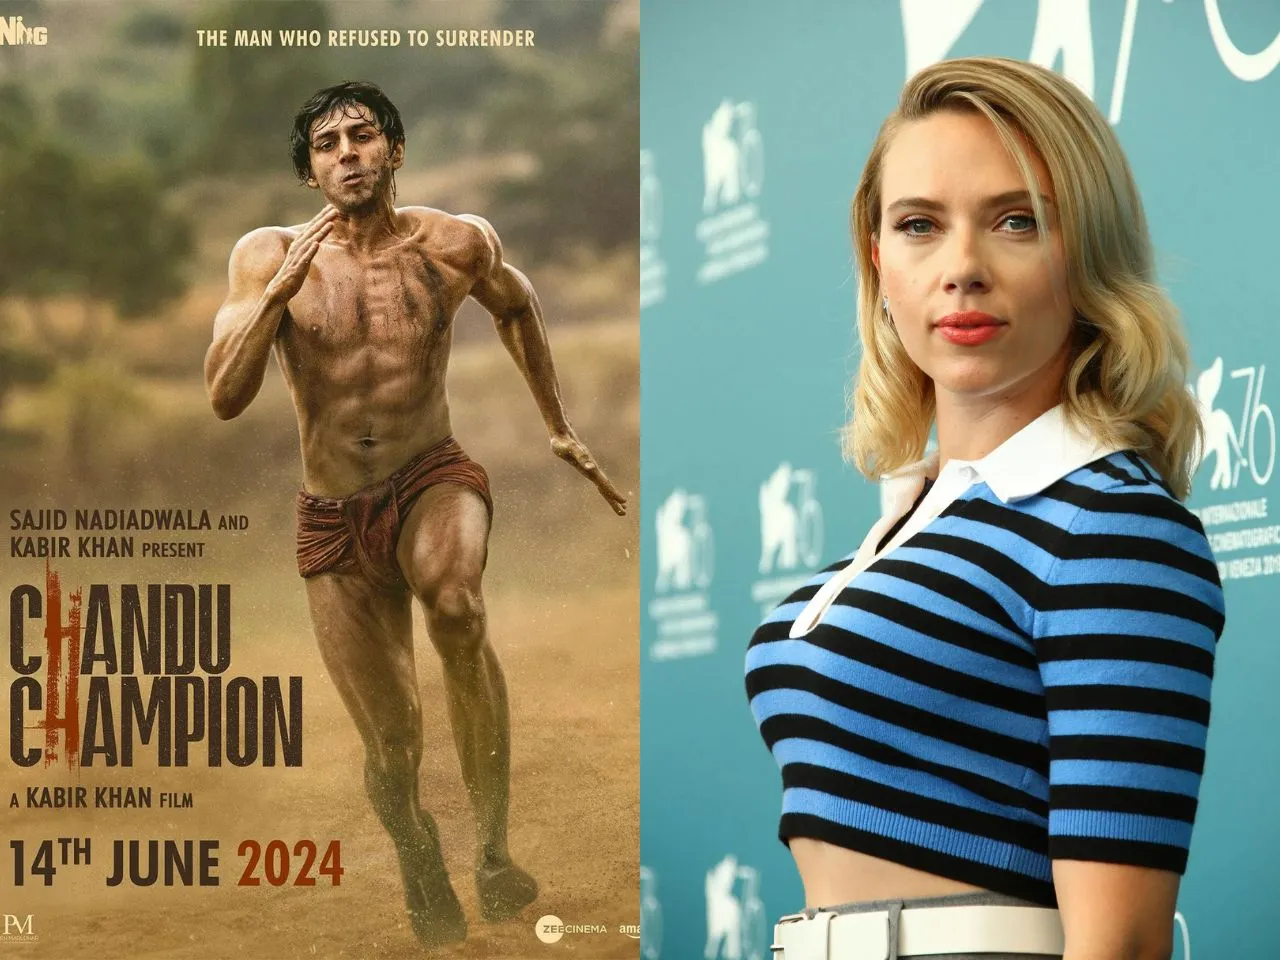 #ICYMI: From Chandu Champion's trailer to Scarlett Johansson's statement, a lot's brewing in the e-world